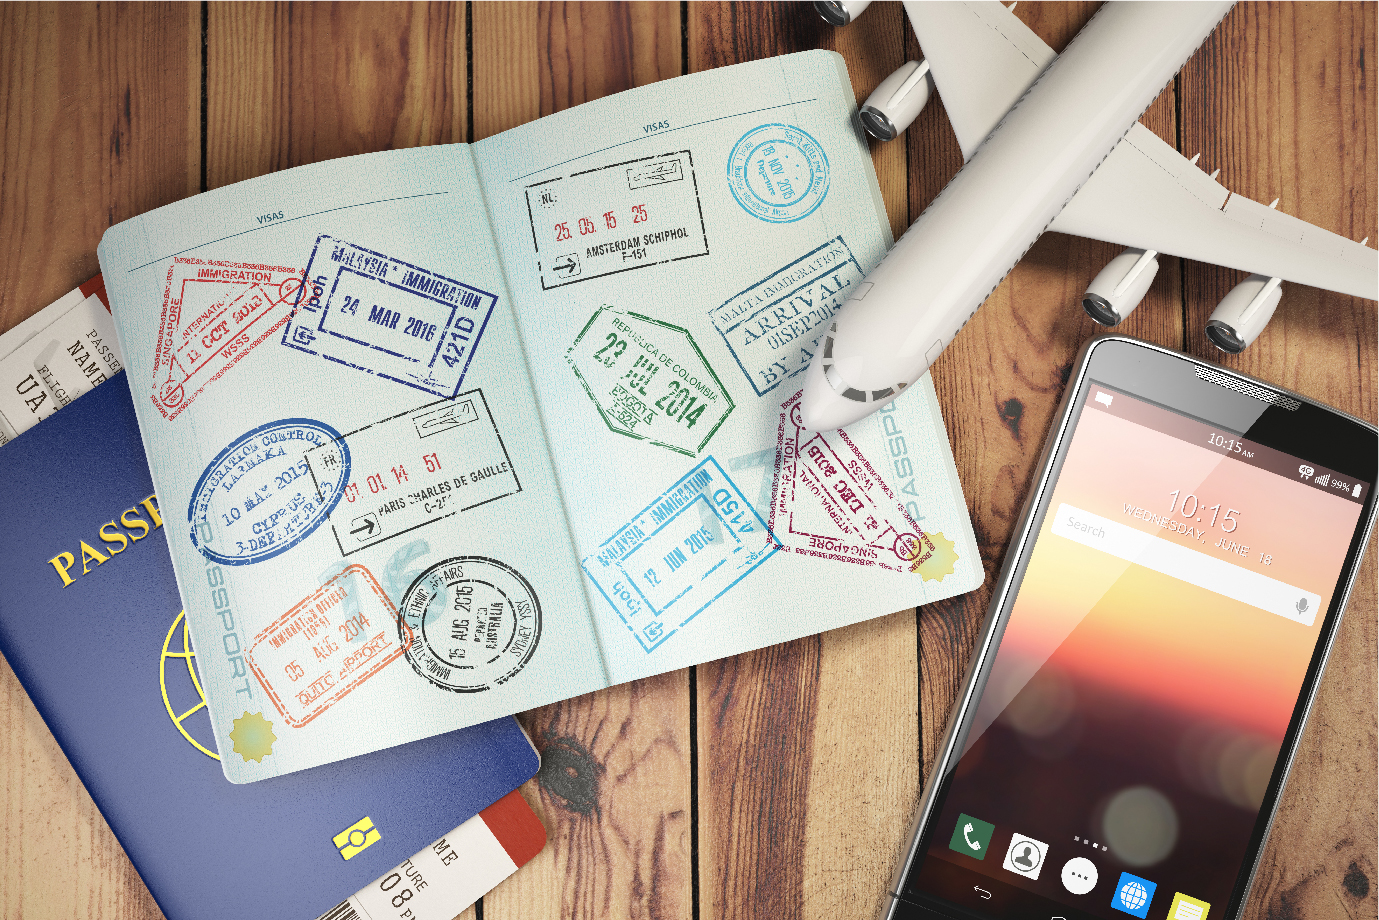 A picture of passports, a cellphone and a model airplane